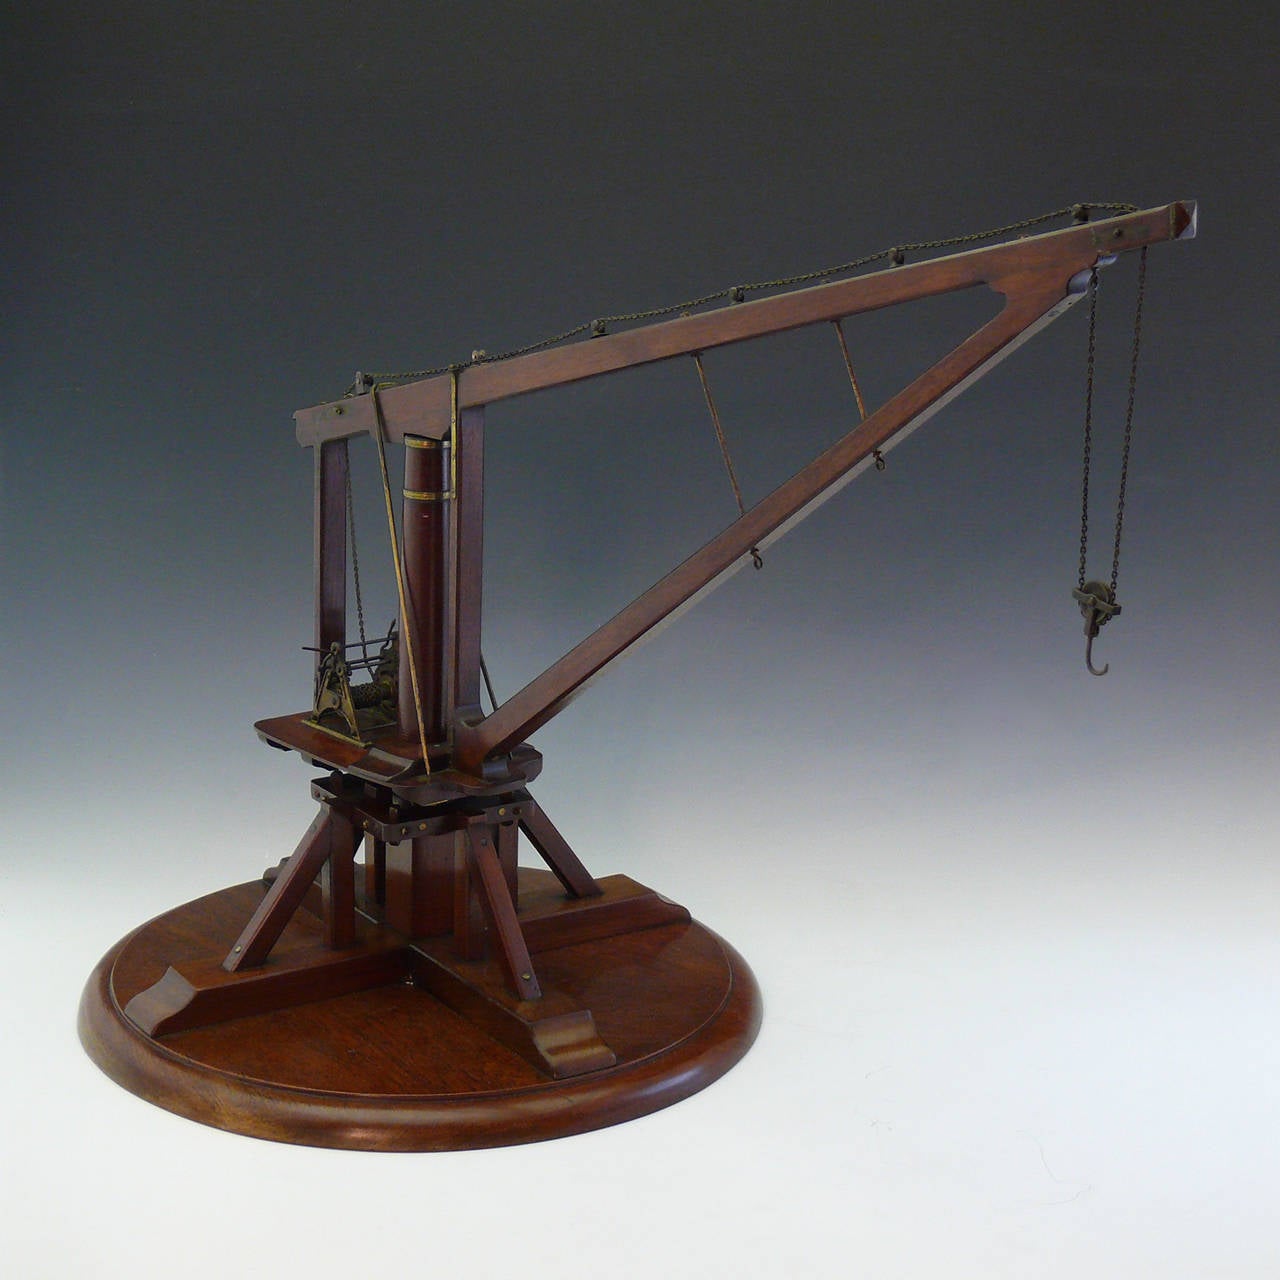 Unusual large scale model of a late Victorian crane, circa 1880. Beautifully constructed in mahogany with brass binding and details and the original working metal winch and chains, all perfectly scaled. The model is finely detailed and it could have